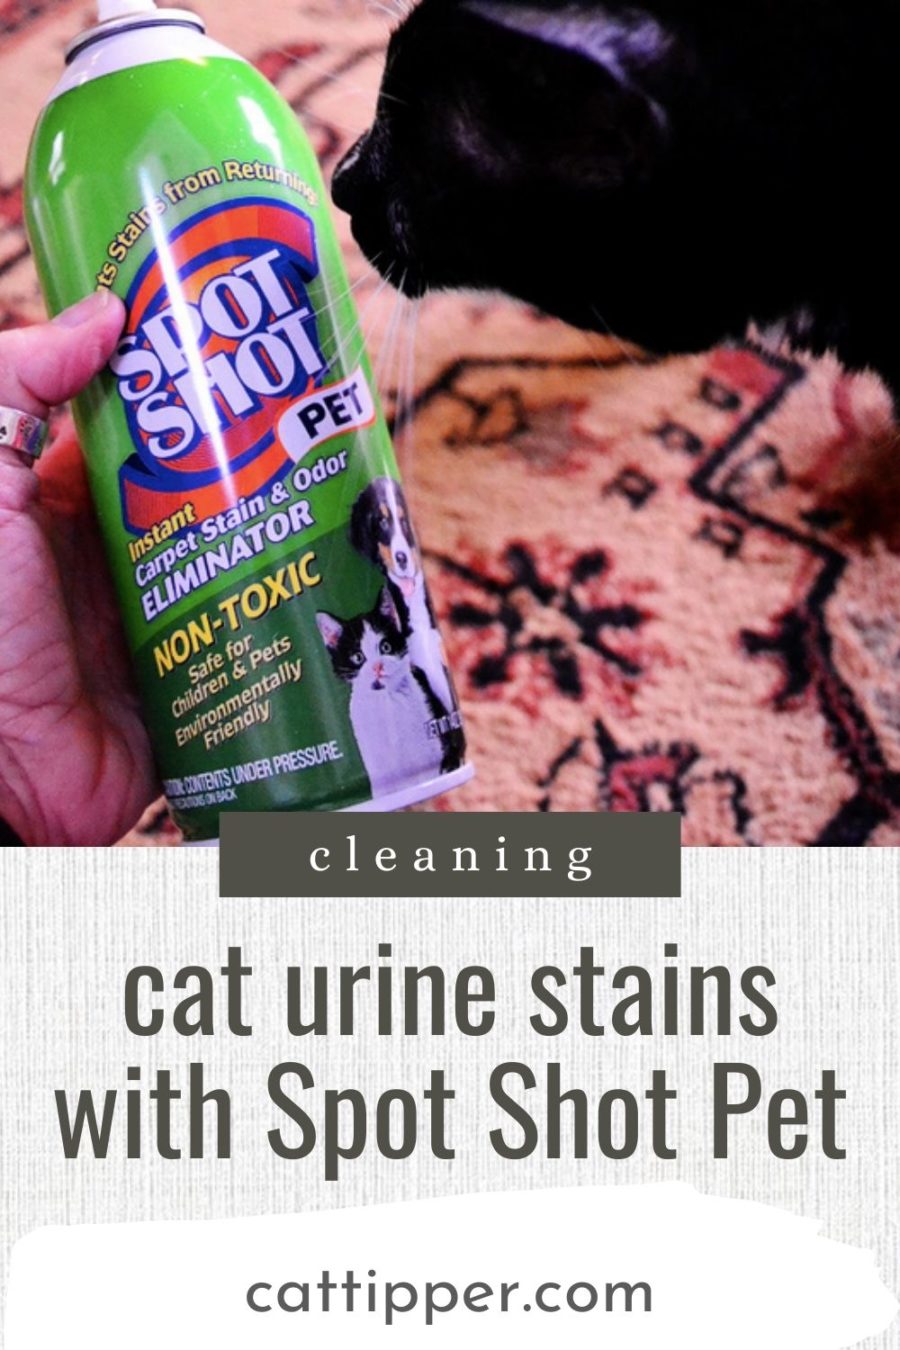 cleaning cat pee and cat vomit with Spot Shot Pet